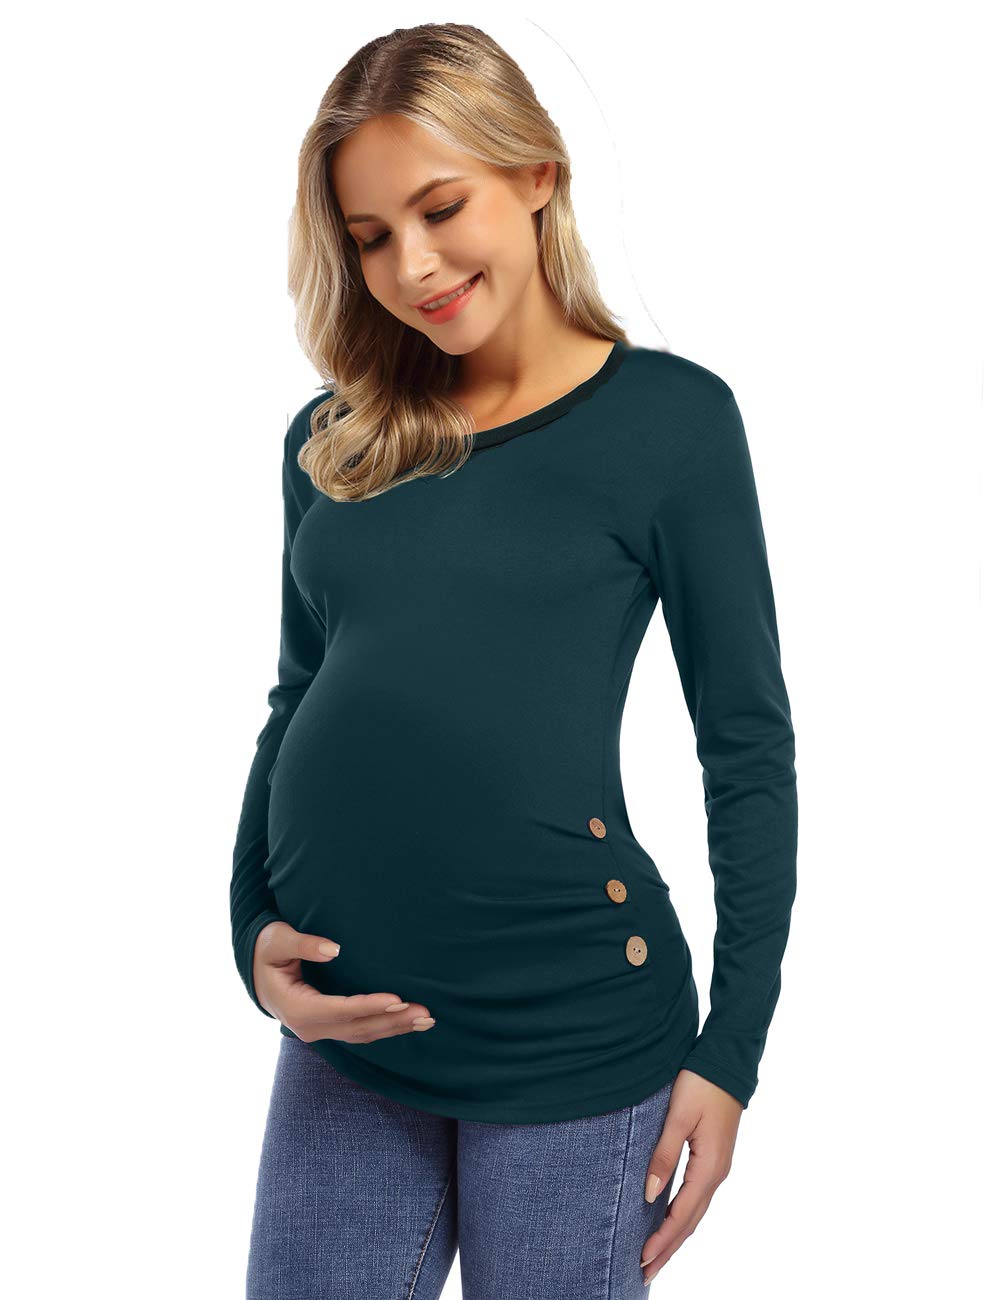 YESFASHION Maternity Shirts Women's V Neck Side Button Plus Size Tops